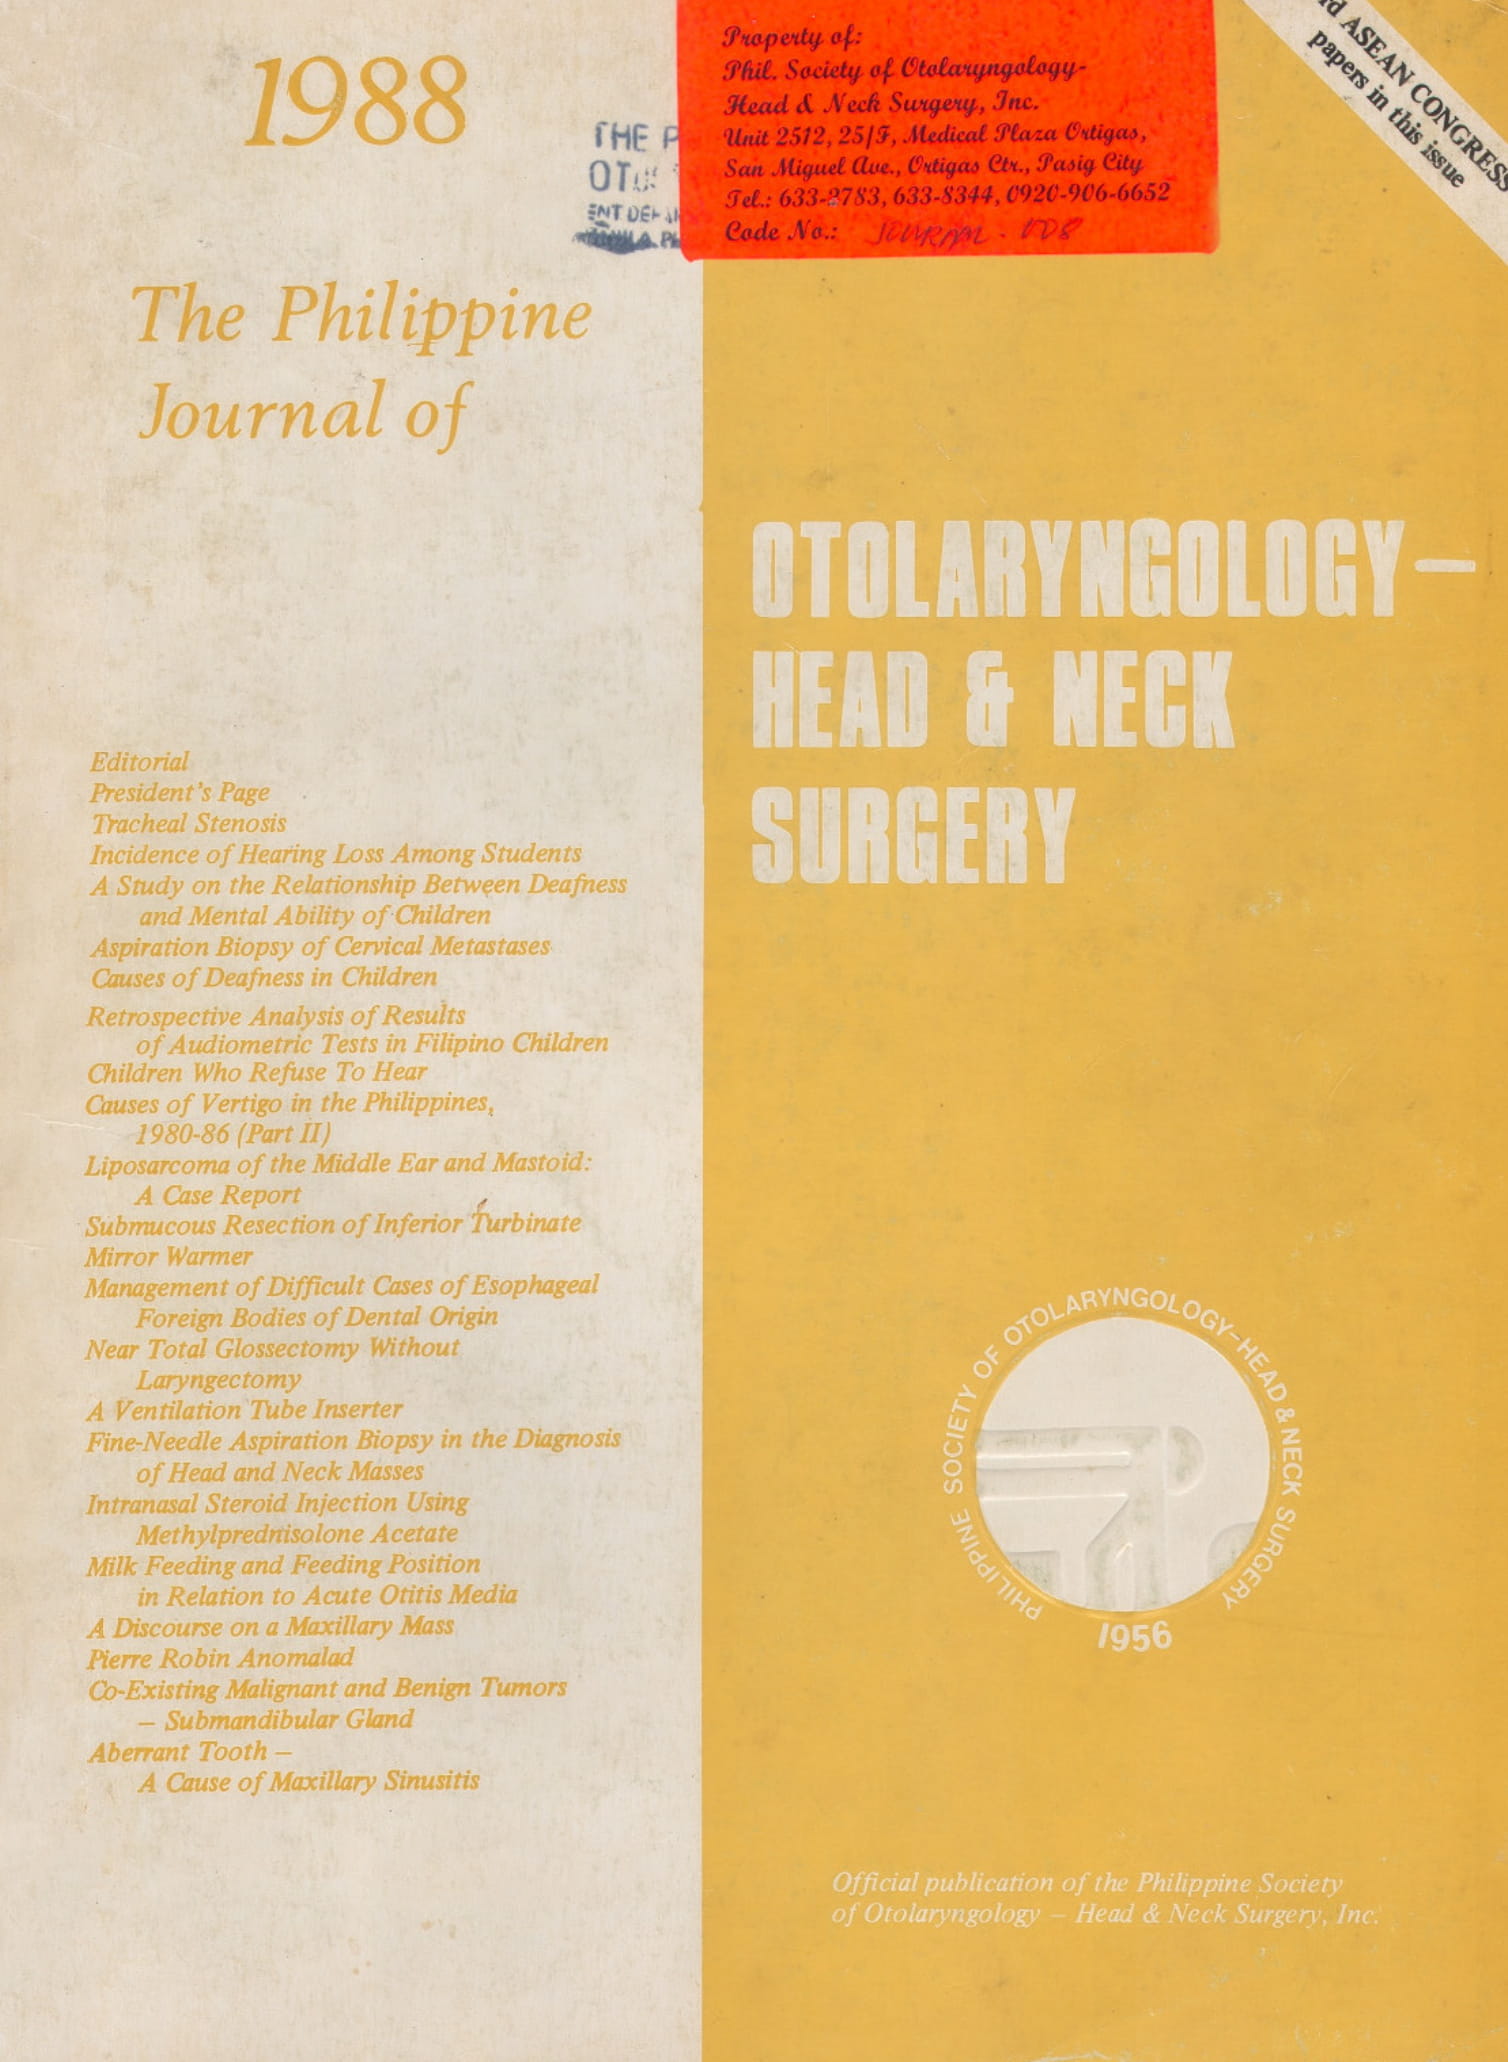 					View 1988: Philippine Journal of Otolaryngology-Head and Neck Surgery
				